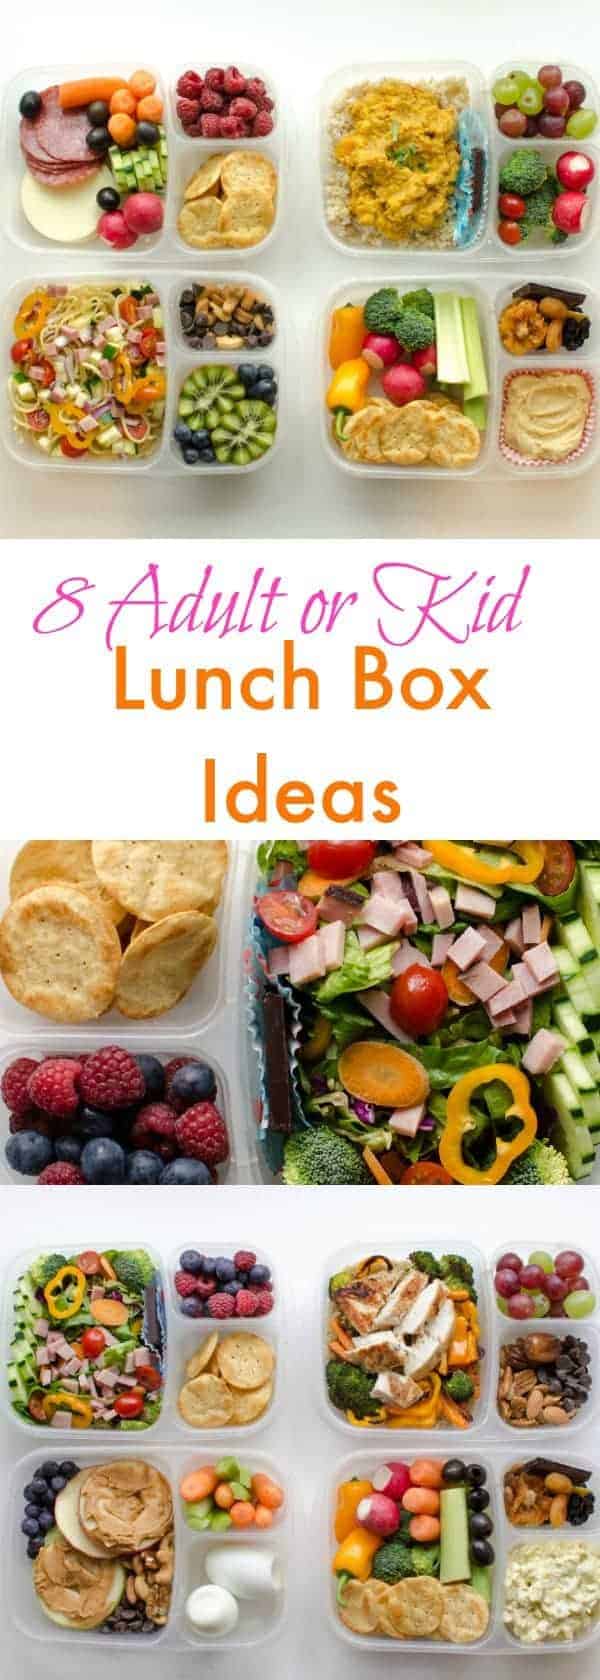 8 awesome adult lunch box ideas that go way beyond the typical sandwich!